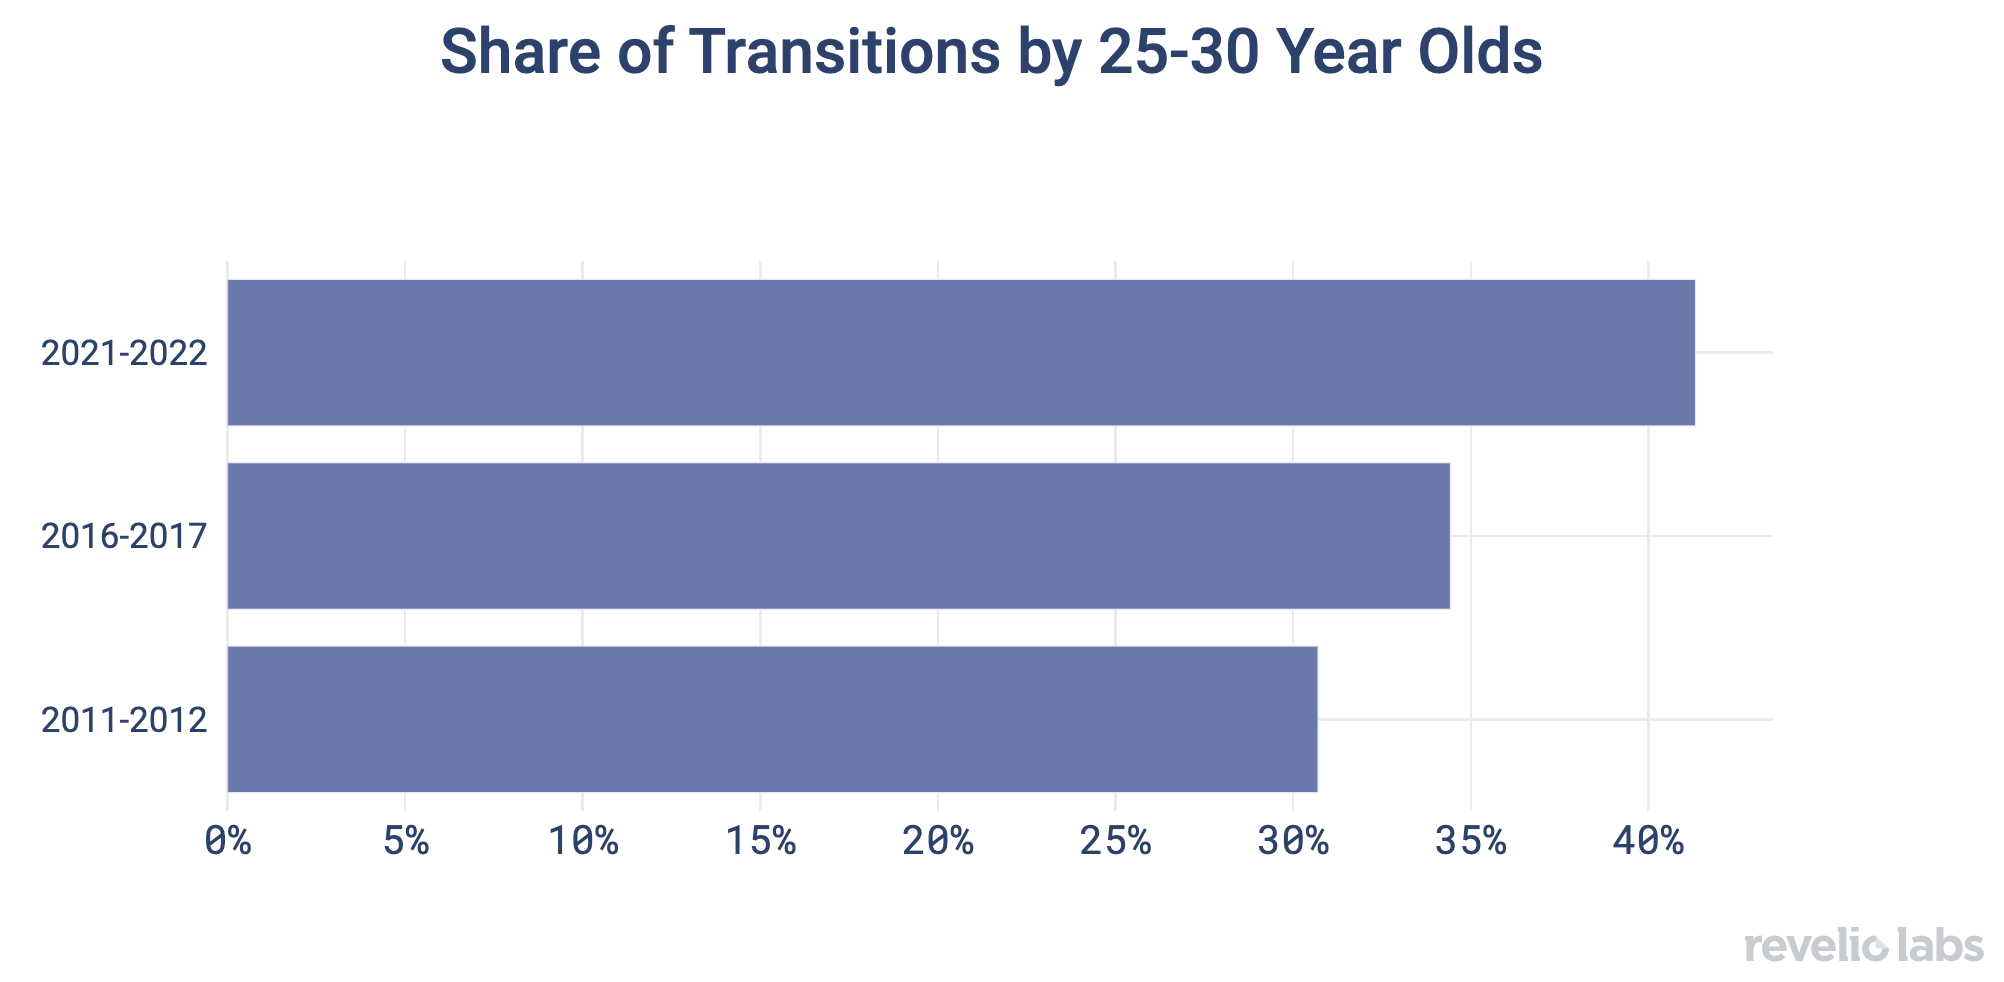 Share of transitions by 25-30 Year Olds